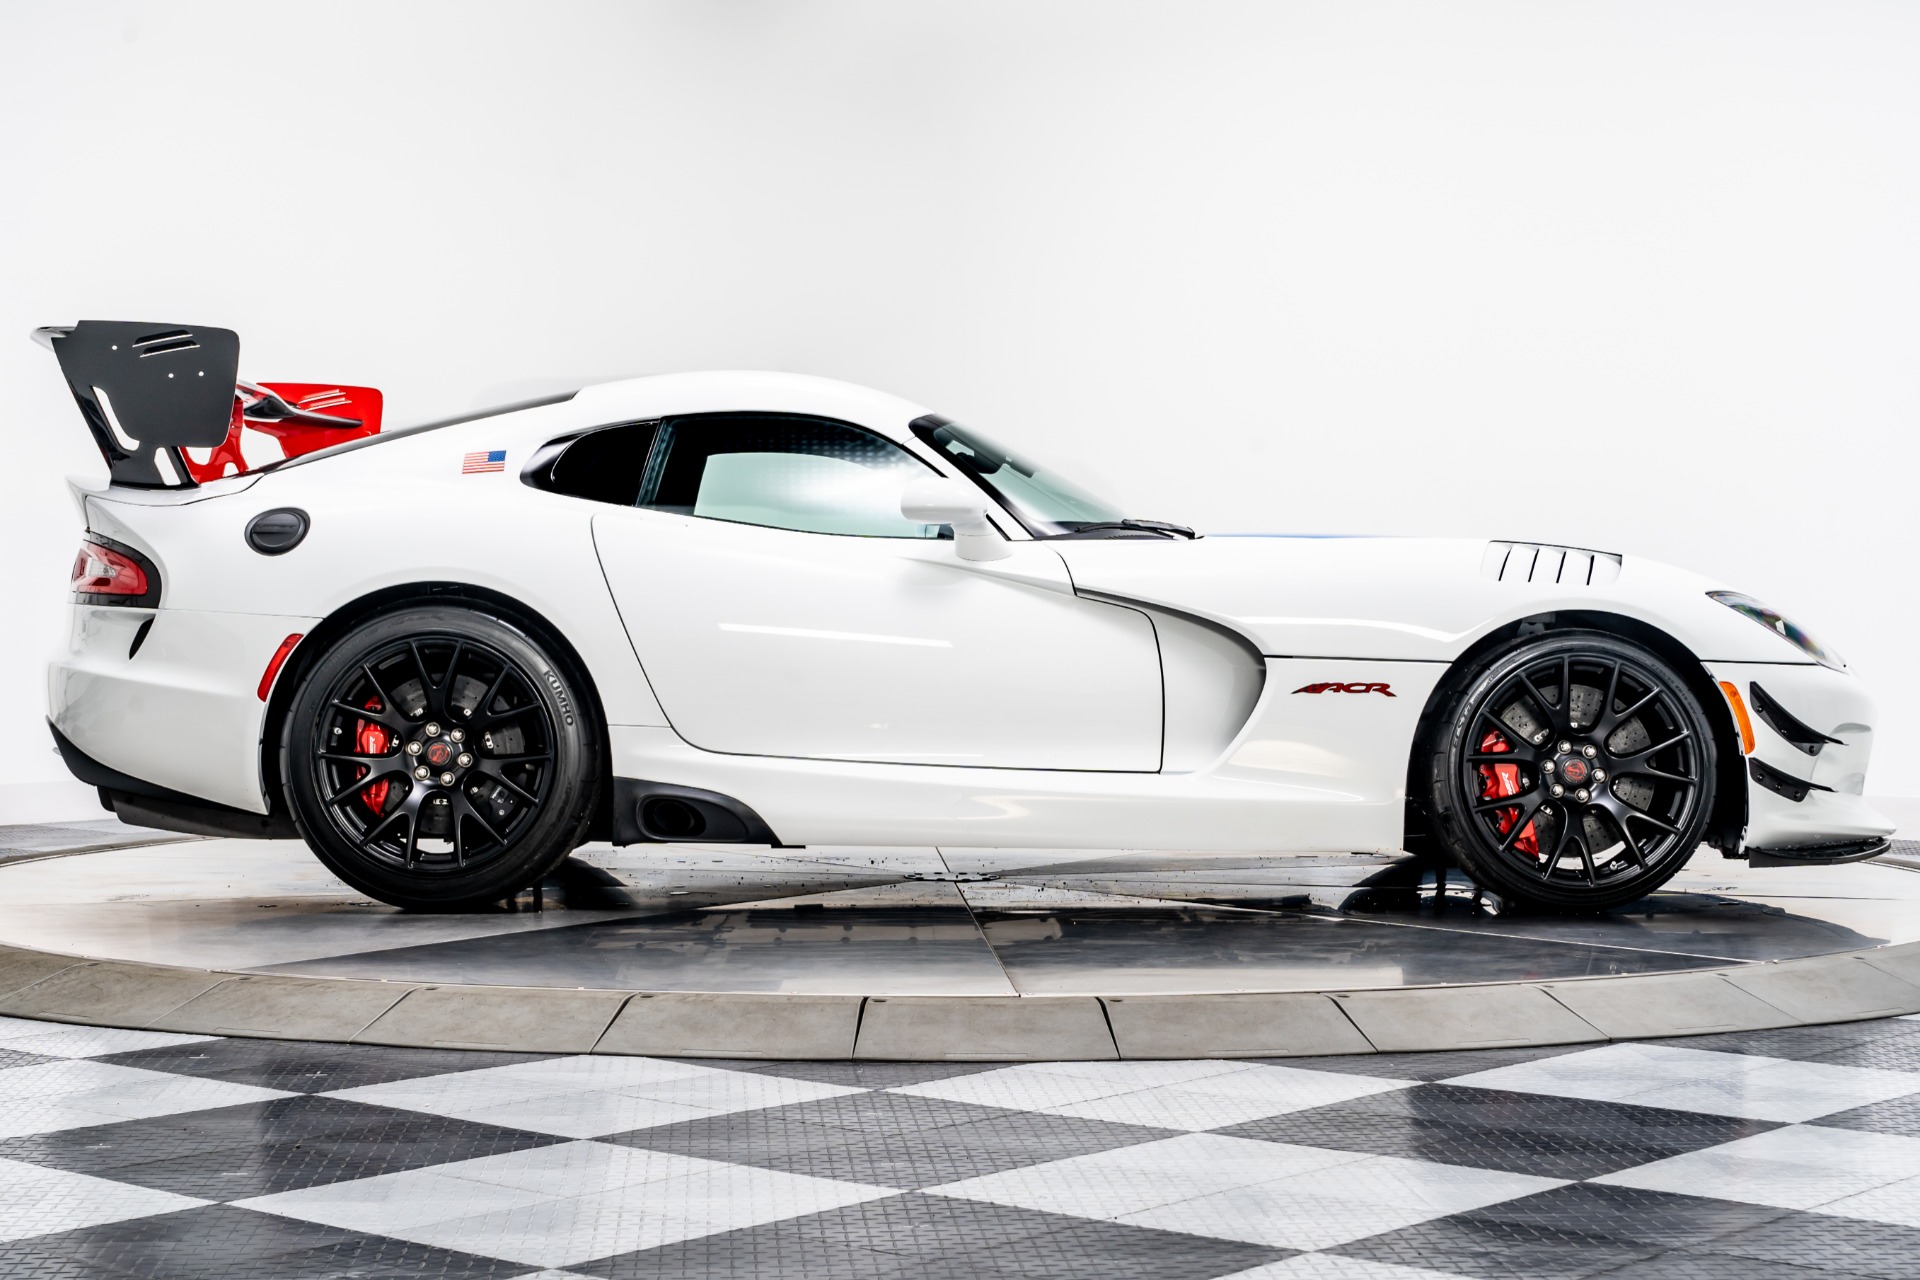 Used 17 Dodge Viper Acr Extreme Aero For Sale Sold Marshall Goldman Motor Sales Stock W